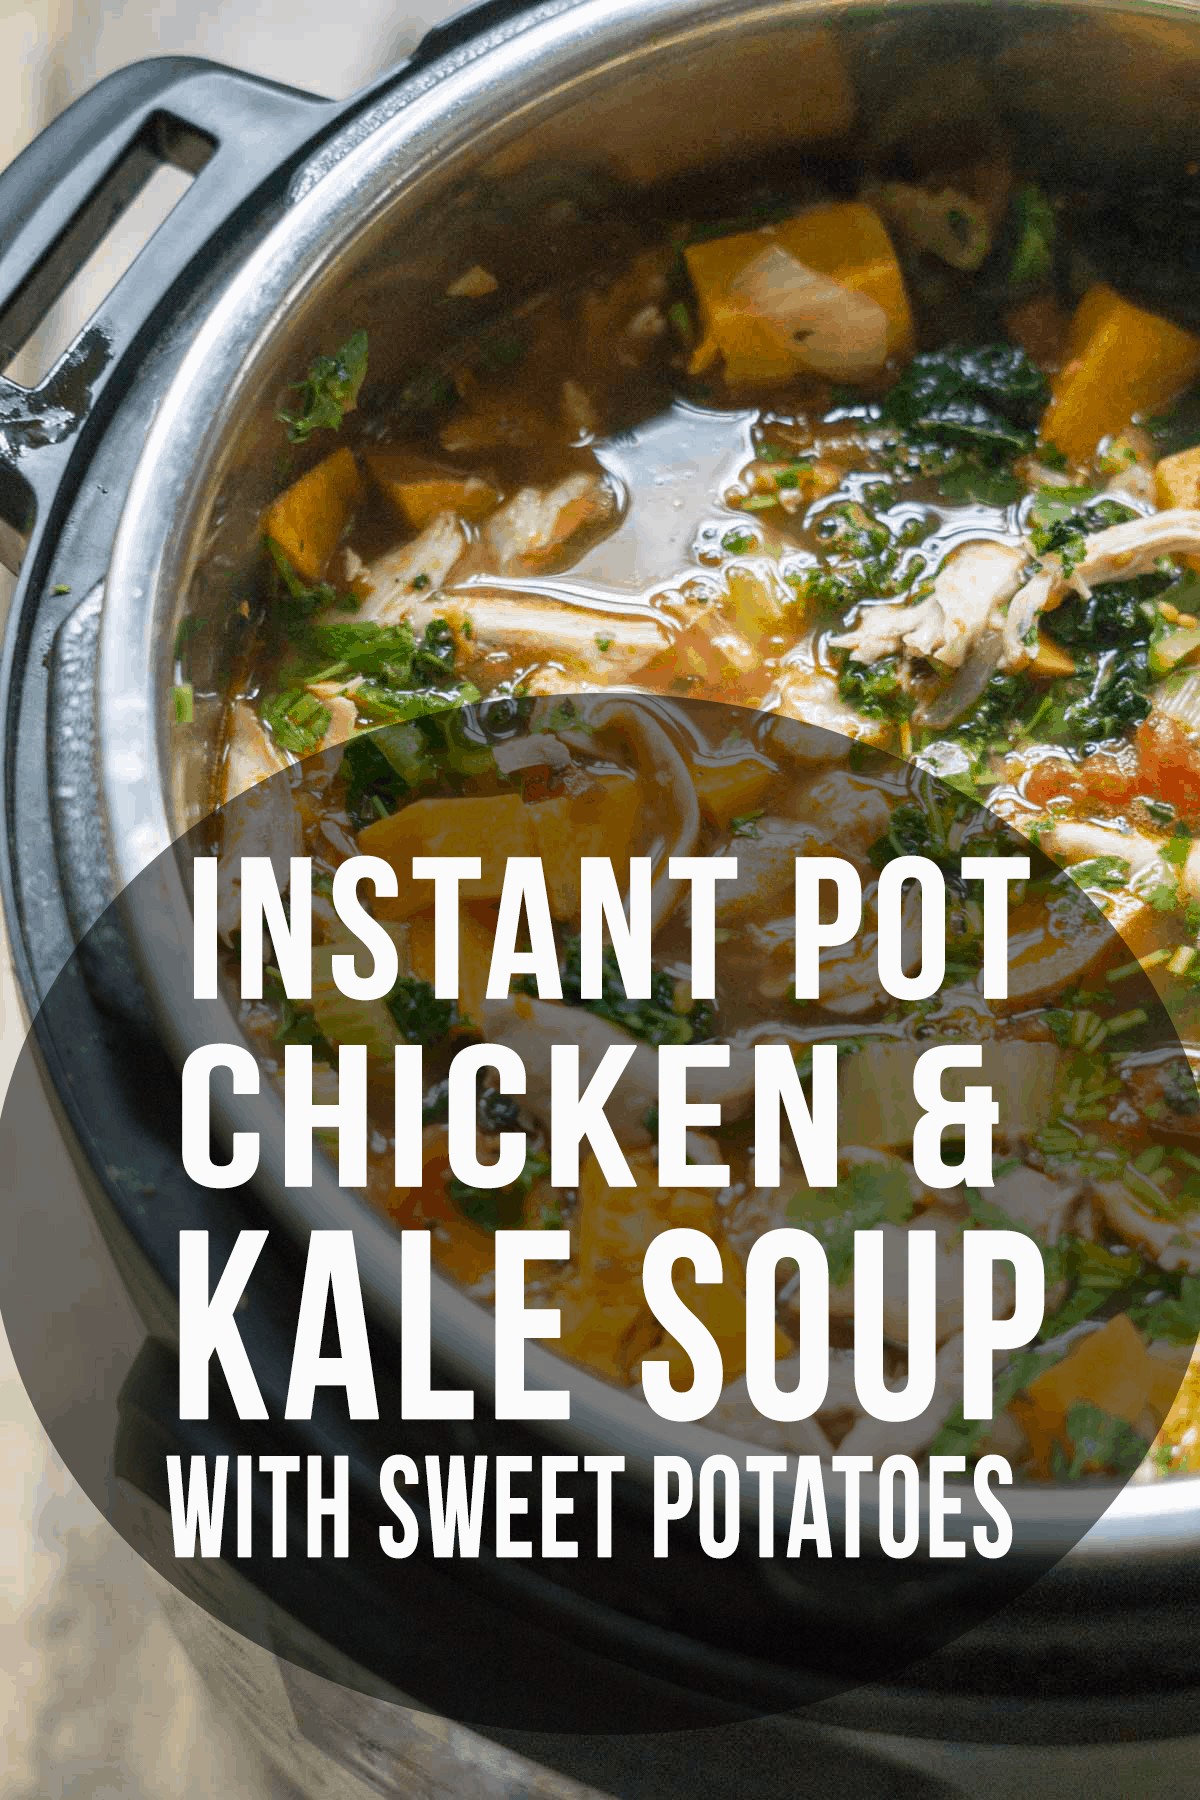 Sweet potato, kale, and chicken soup made in the Instant Pot #souprecipes #glutenfreesoup #leftoverturkey #kalerecipes #chickenrecipes #glutenfreerecipes #soup #healthysoup #healthyrecipes #instantpotsoup #instantpotrecipes #instantpot #dairyfree 